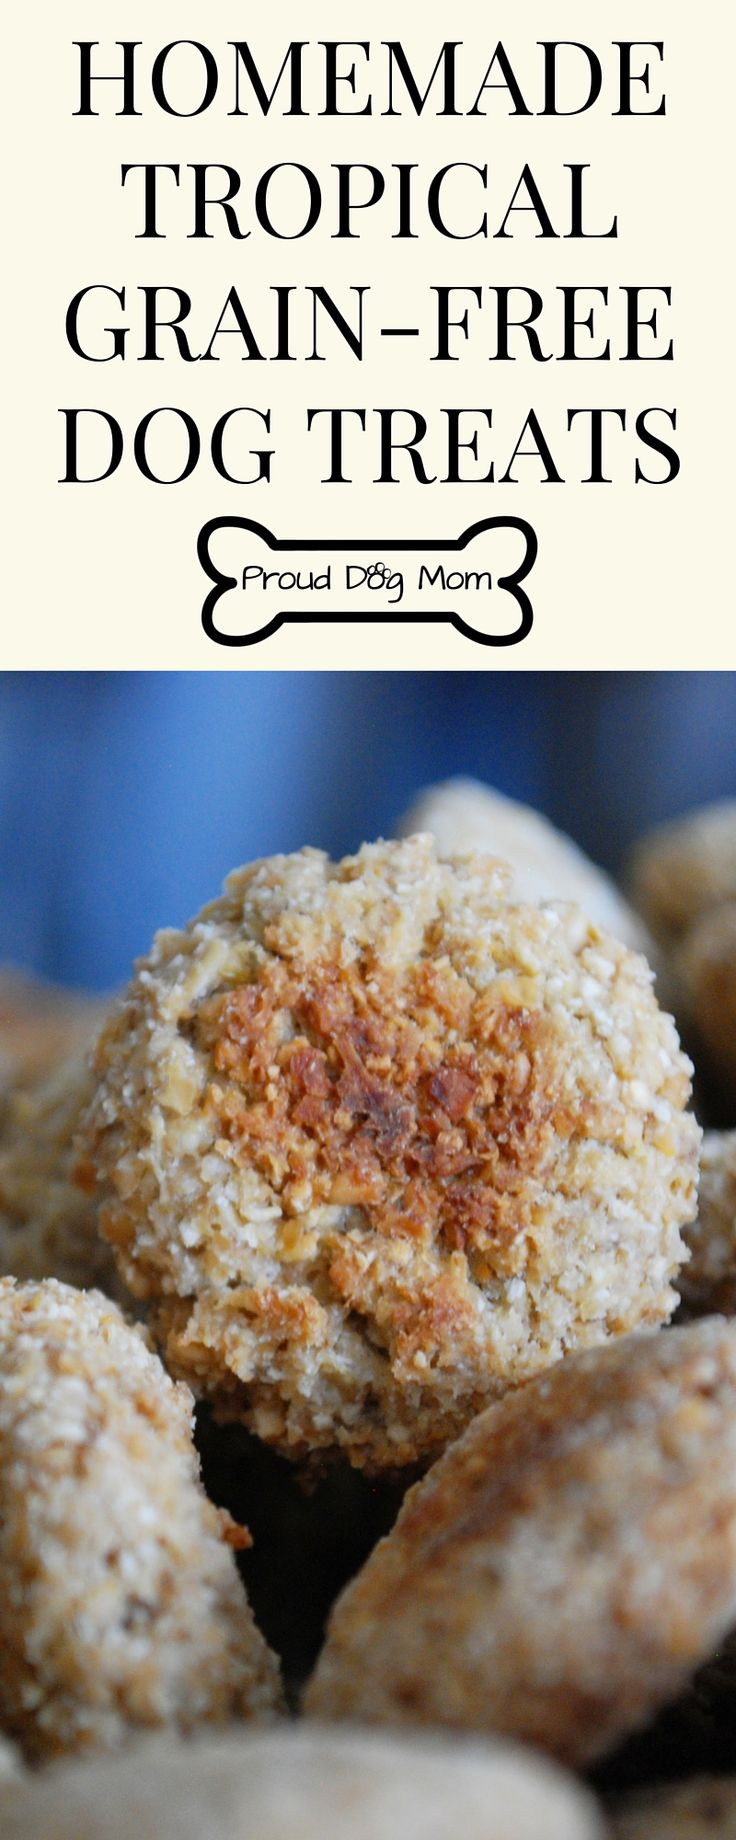 DIY Grain Free Dog Treats
 1000 images about Proud Dog Mom on Pinterest